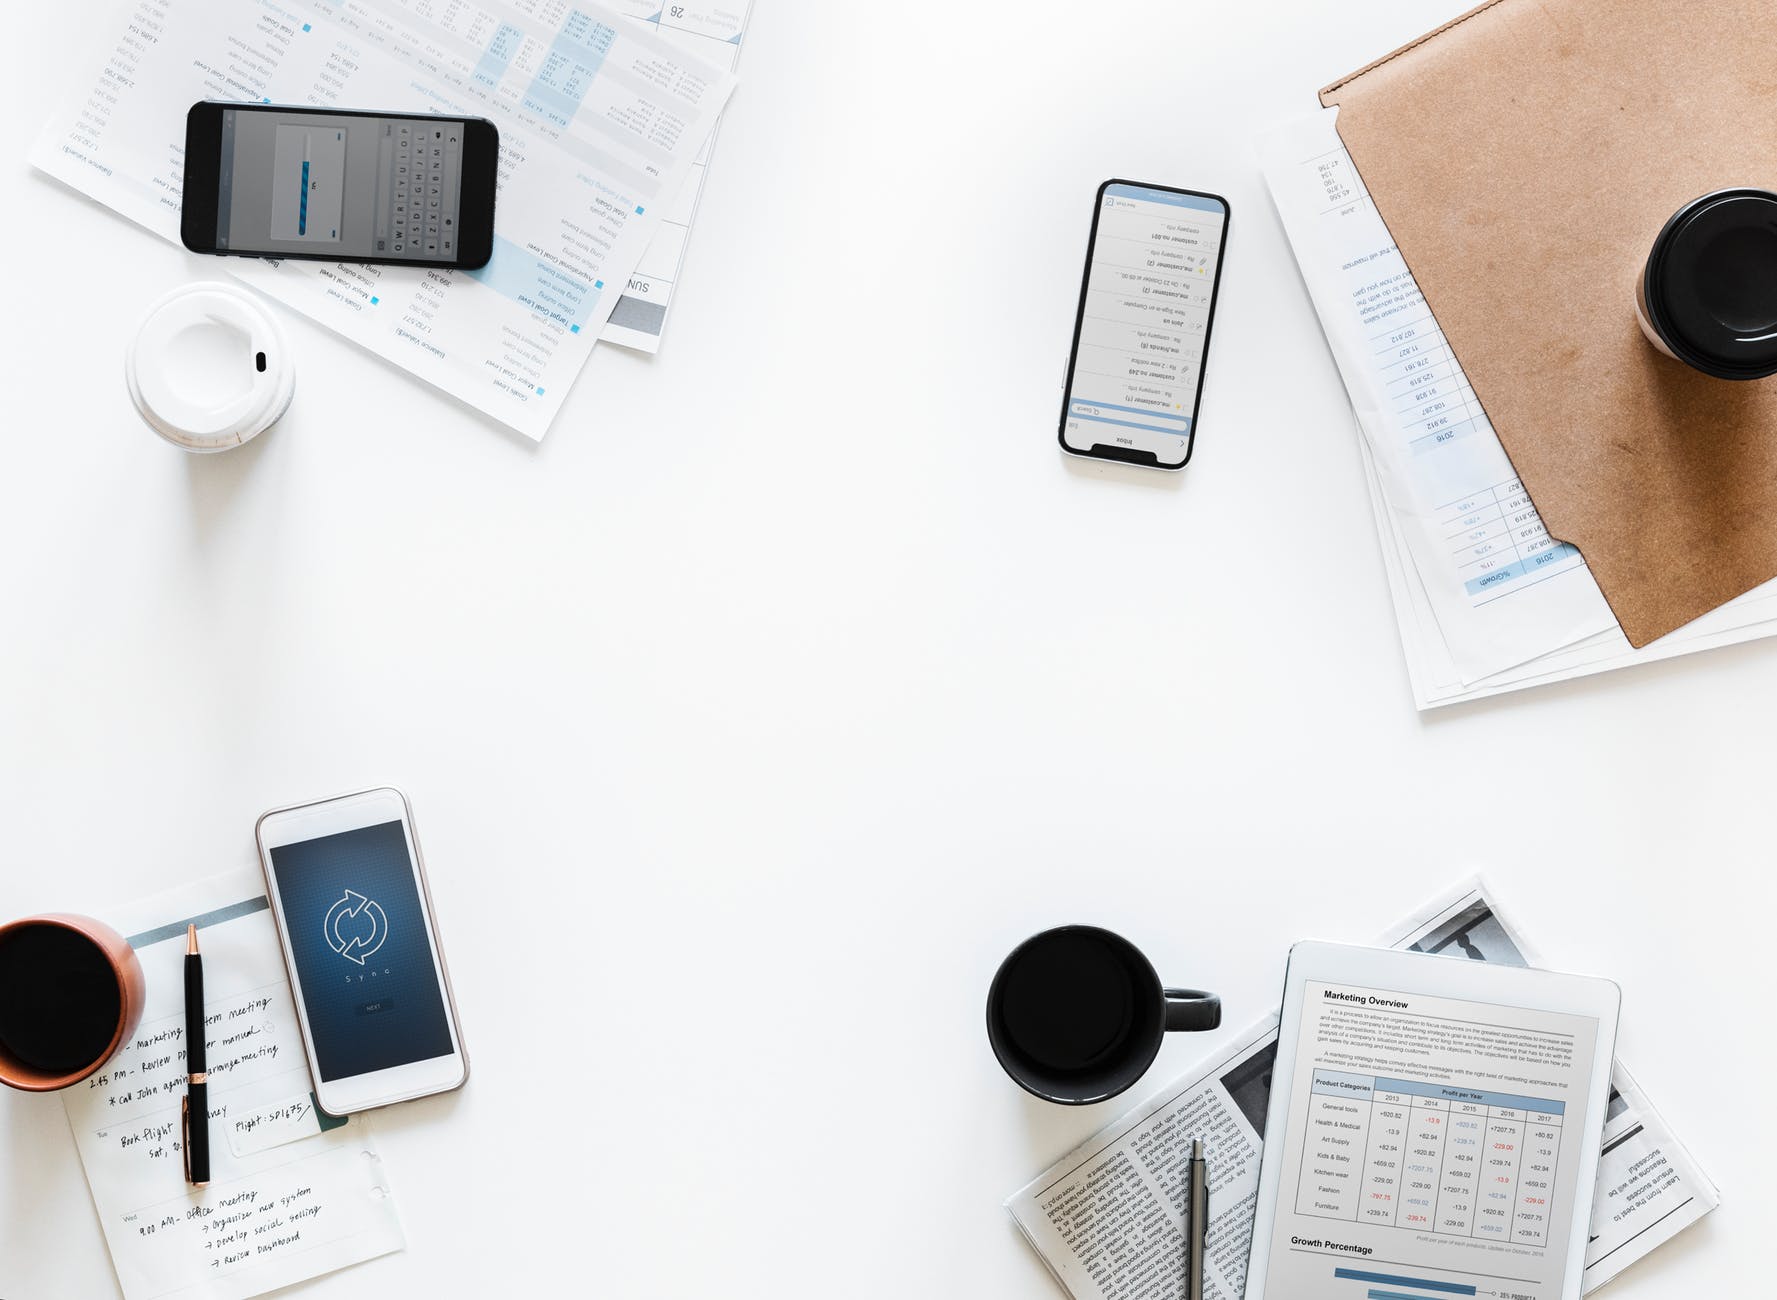 Growing Your Brand's Social Media Team featured image: smartphones and tablets and notepads and files with digital marketing topics on them, sitting near coffee mugs, spread out on a white table.